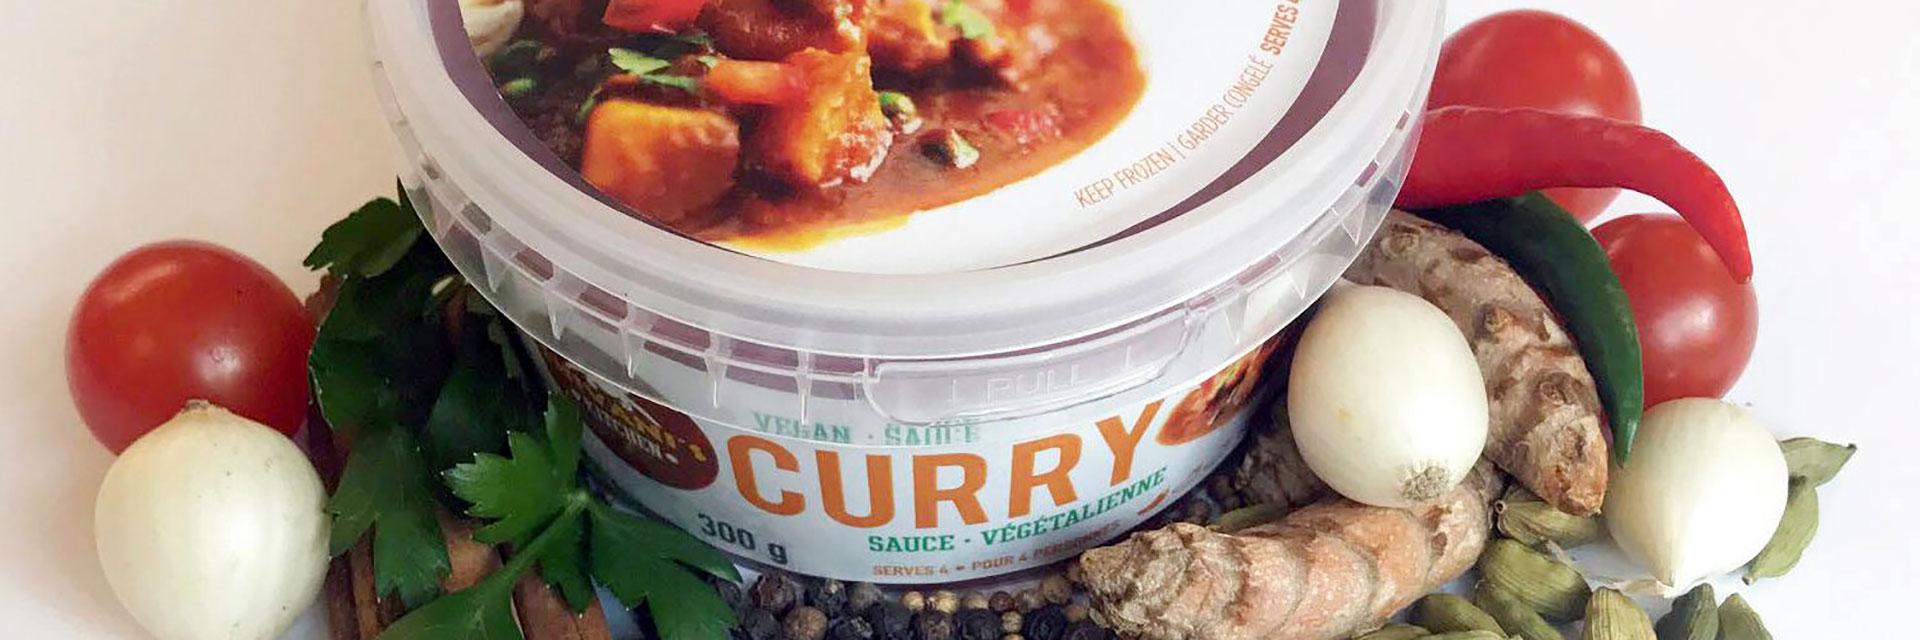 A container of Shivani's Kitchen curry surrounded by ingredients.